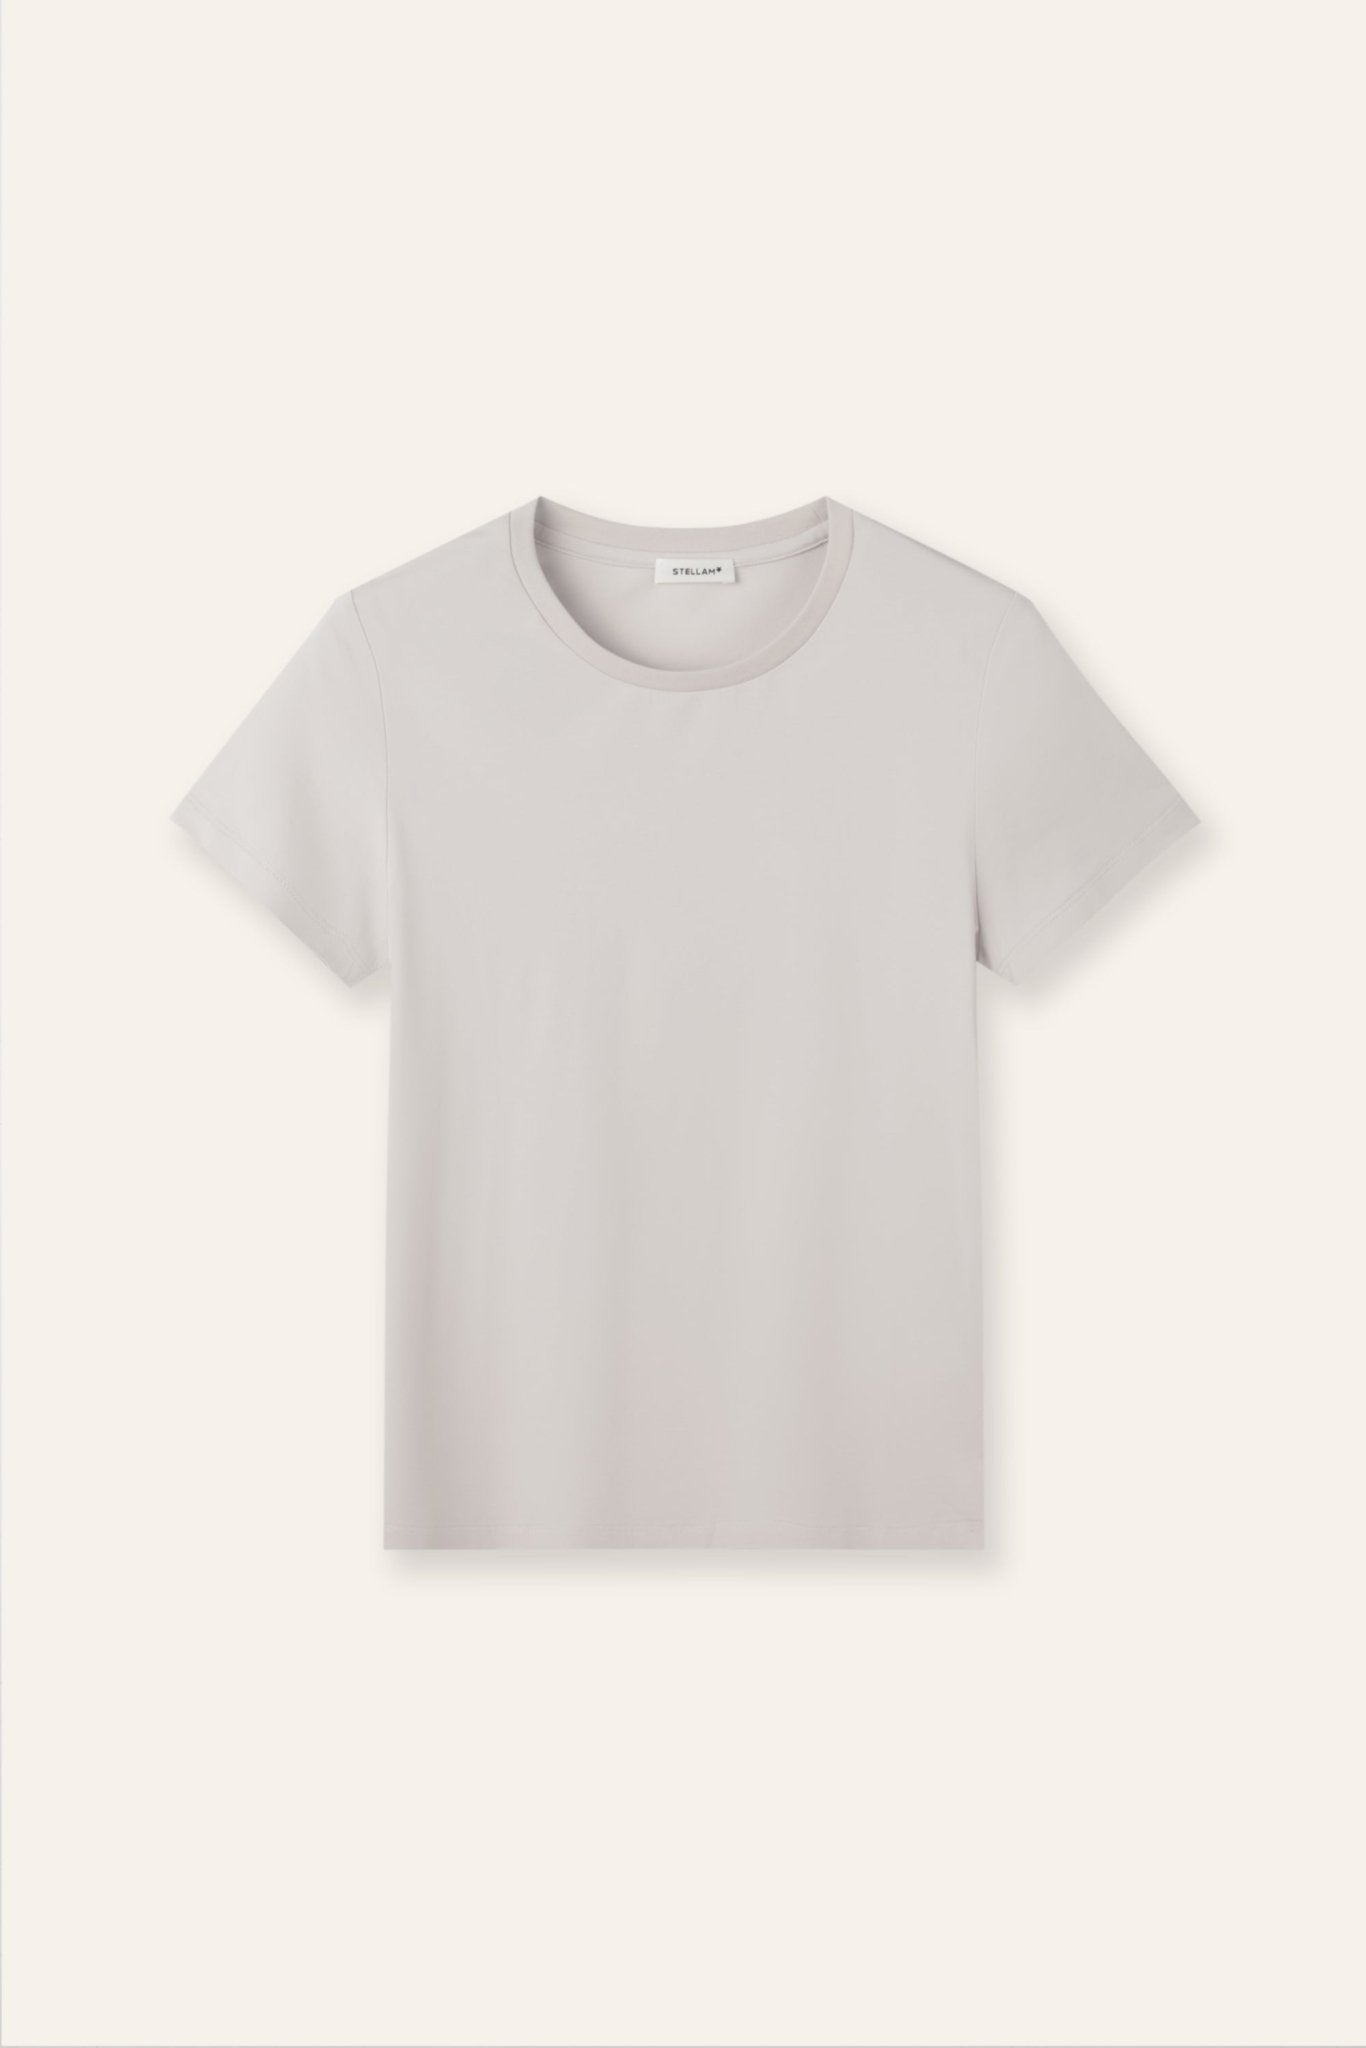 SIGNATURE relaxed jersey tee (Stone) - STELLAM